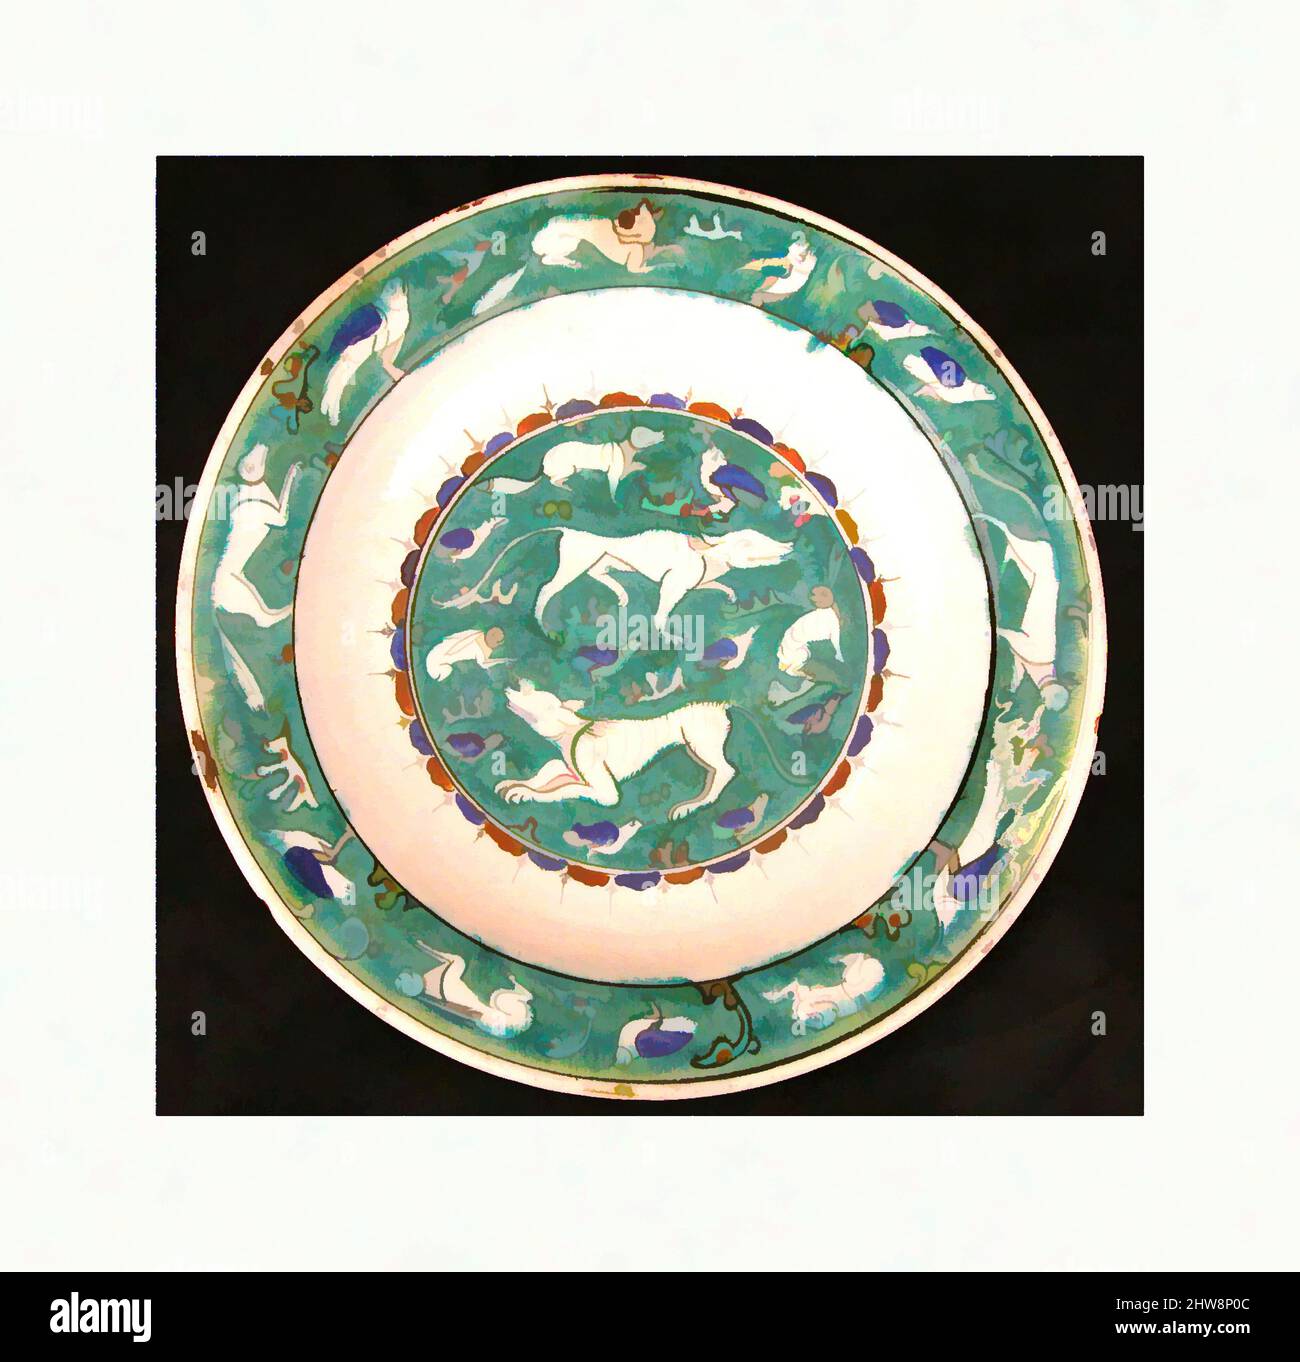 Art inspired by Dish with Bird, Rabbit and Quadruped Design, last quarter 16th century, Made in Turkey, Iznik, Stonepaste; polychrome painted under transparent glaze, H. 2 3/16 in. (5.6 cm), Ceramics, The animals on this dish, some more recognizable than others, have an old, Classic works modernized by Artotop with a splash of modernity. Shapes, color and value, eye-catching visual impact on art. Emotions through freedom of artworks in a contemporary way. A timeless message pursuing a wildly creative new direction. Artists turning to the digital medium and creating the Artotop NFT Stock Photo